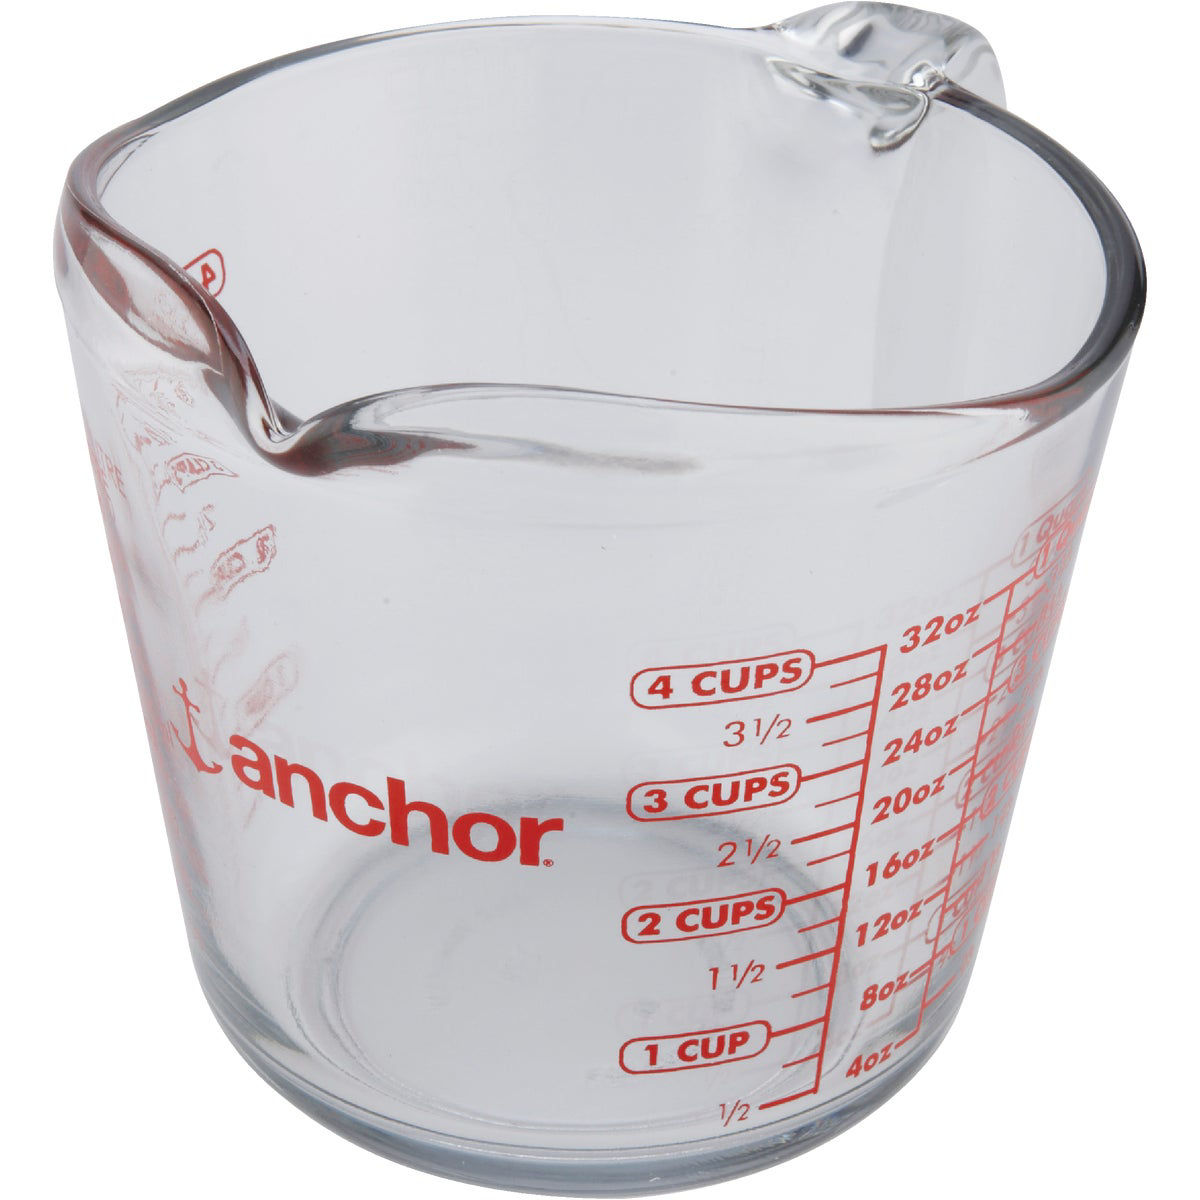 Large 4 Cup Measuring Cup by Anchor Hocking 